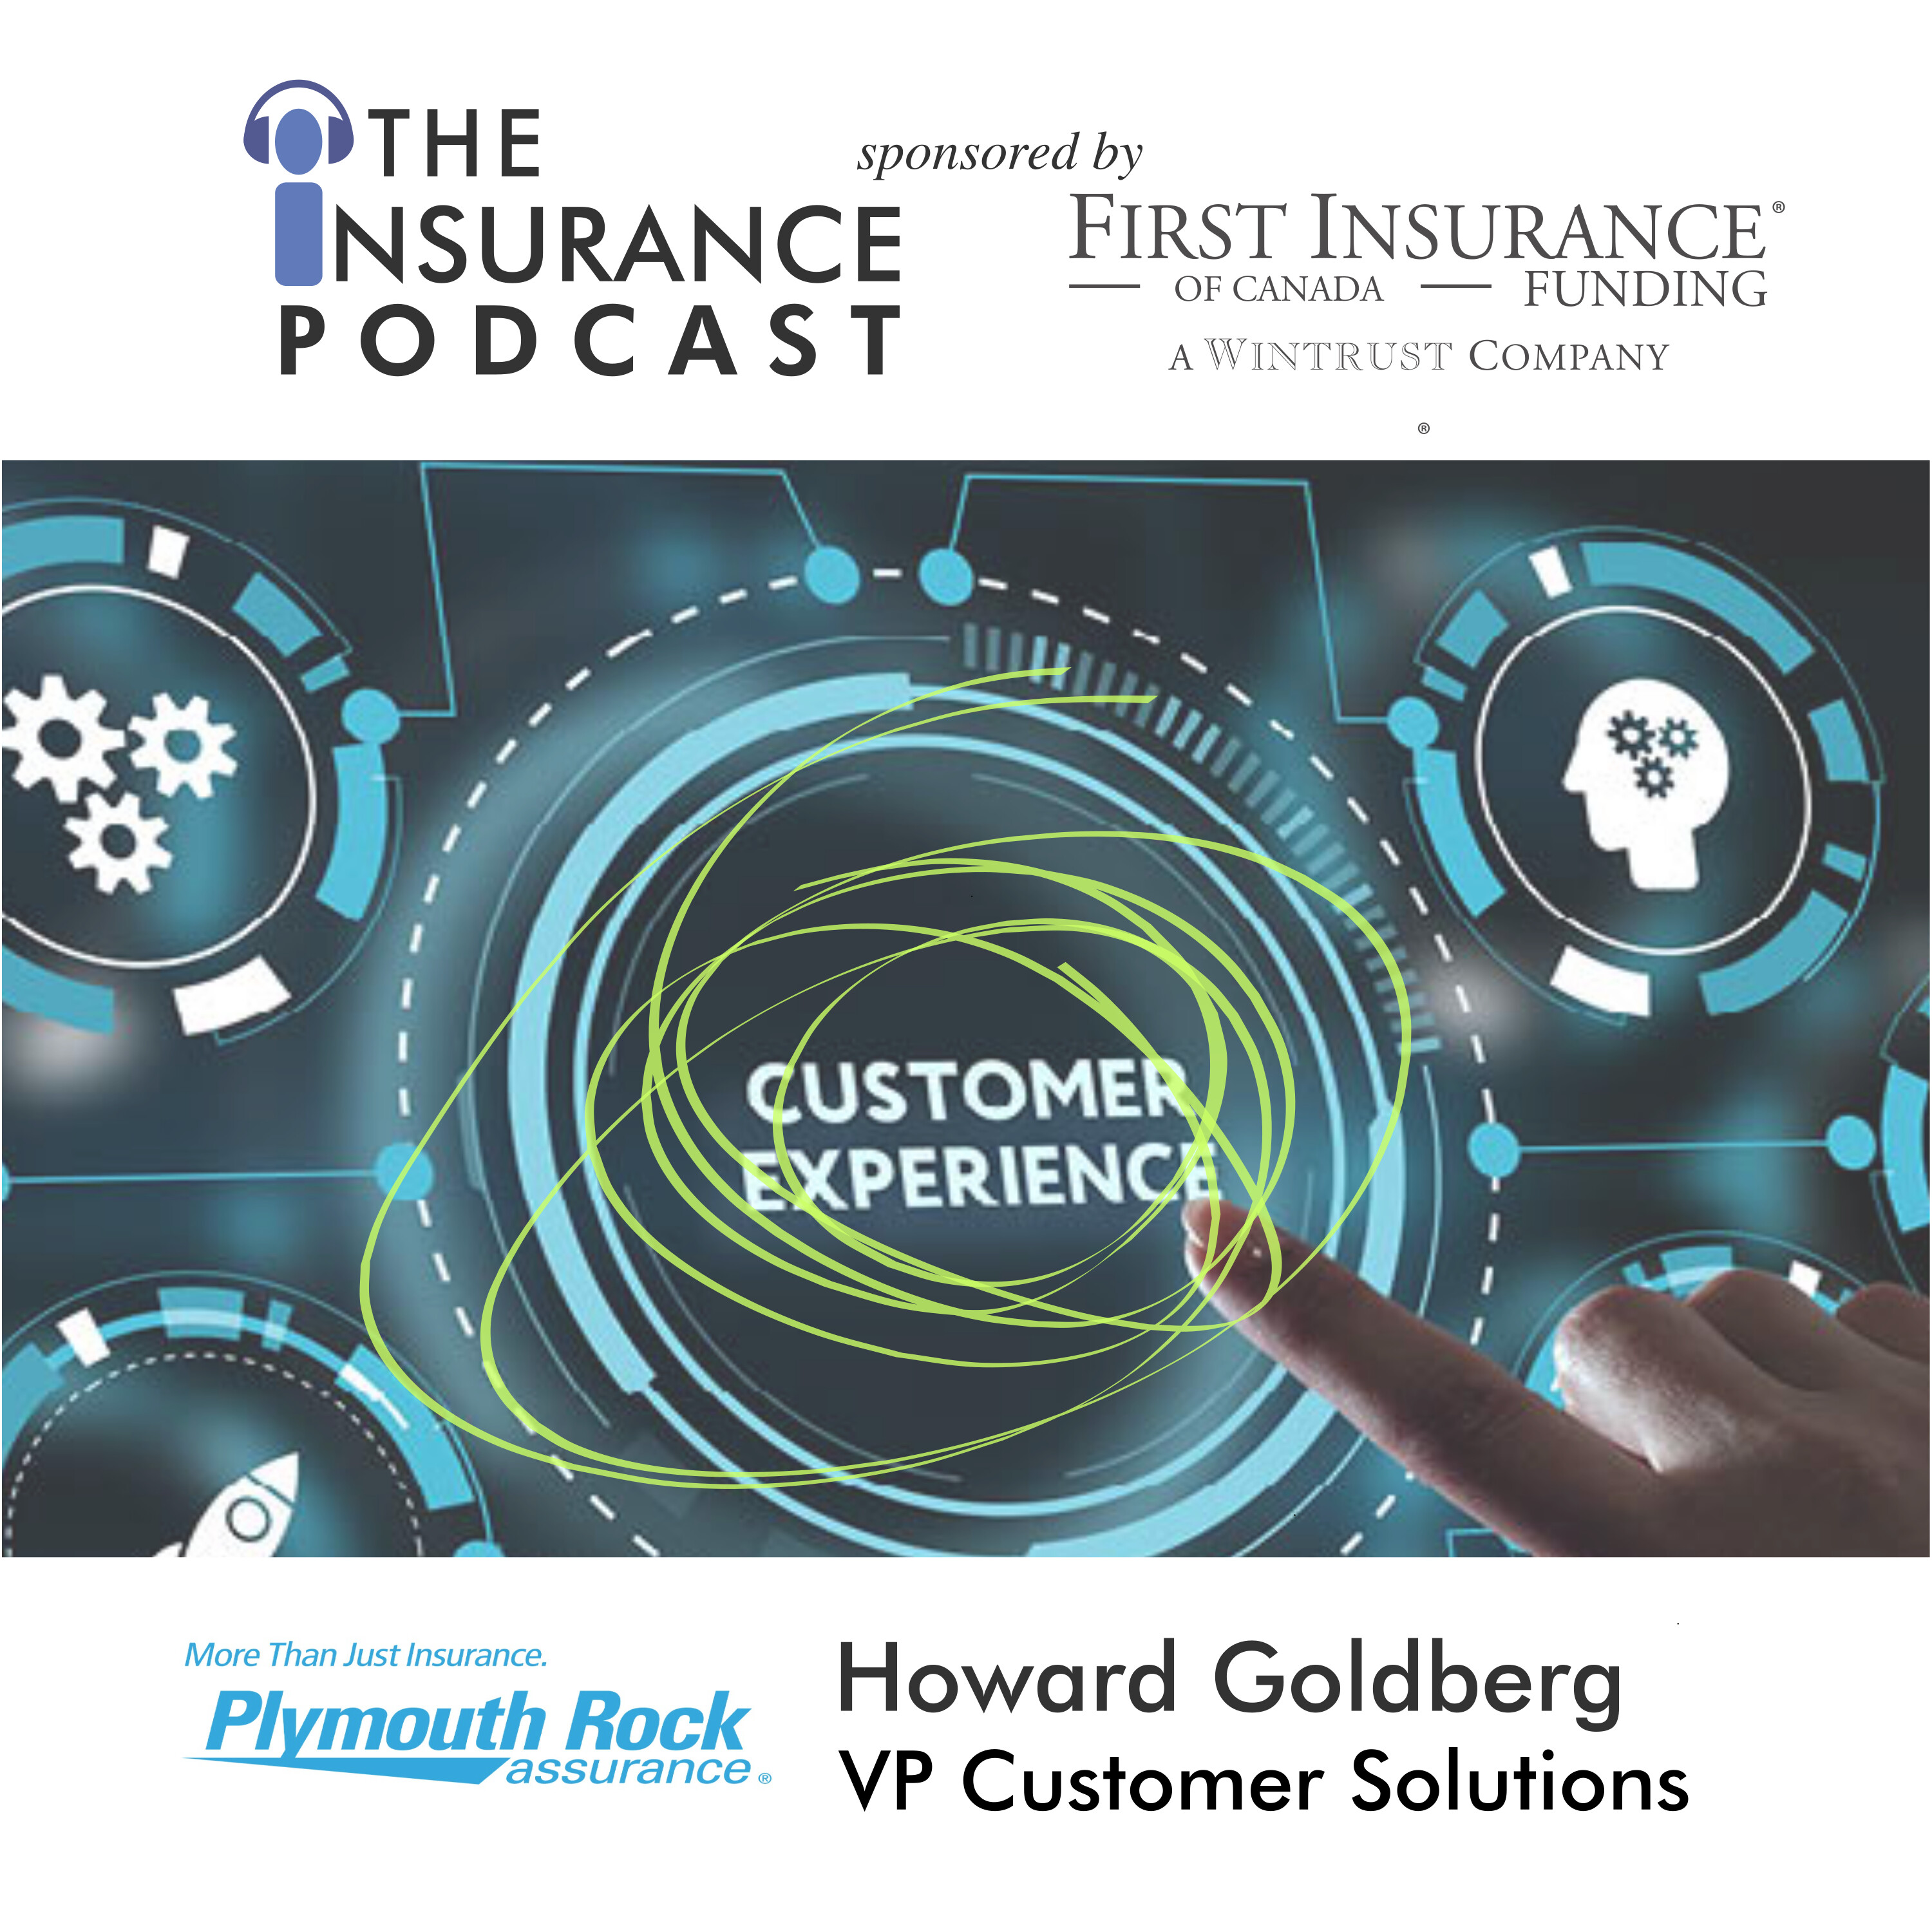 Lesson in Customer Experience- Howard Goldberg from Plymouth Rock Assurance